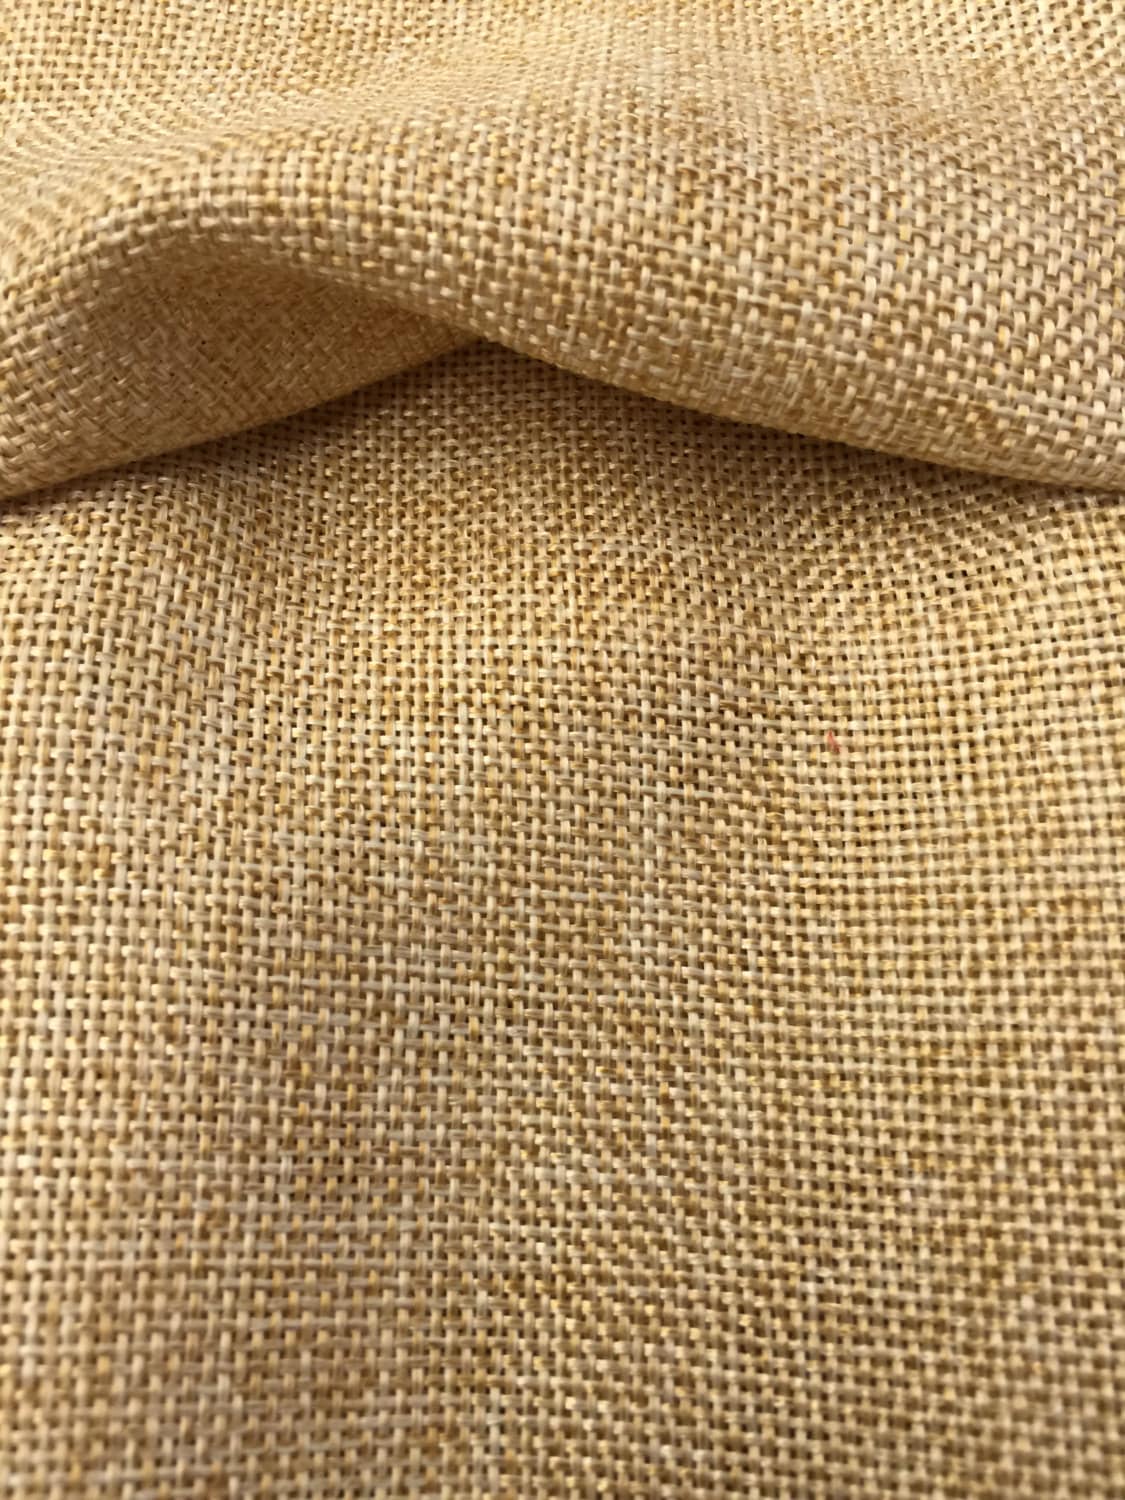 Faux Natural Burlap Fabric | Sold By The Yard 58/60 Width